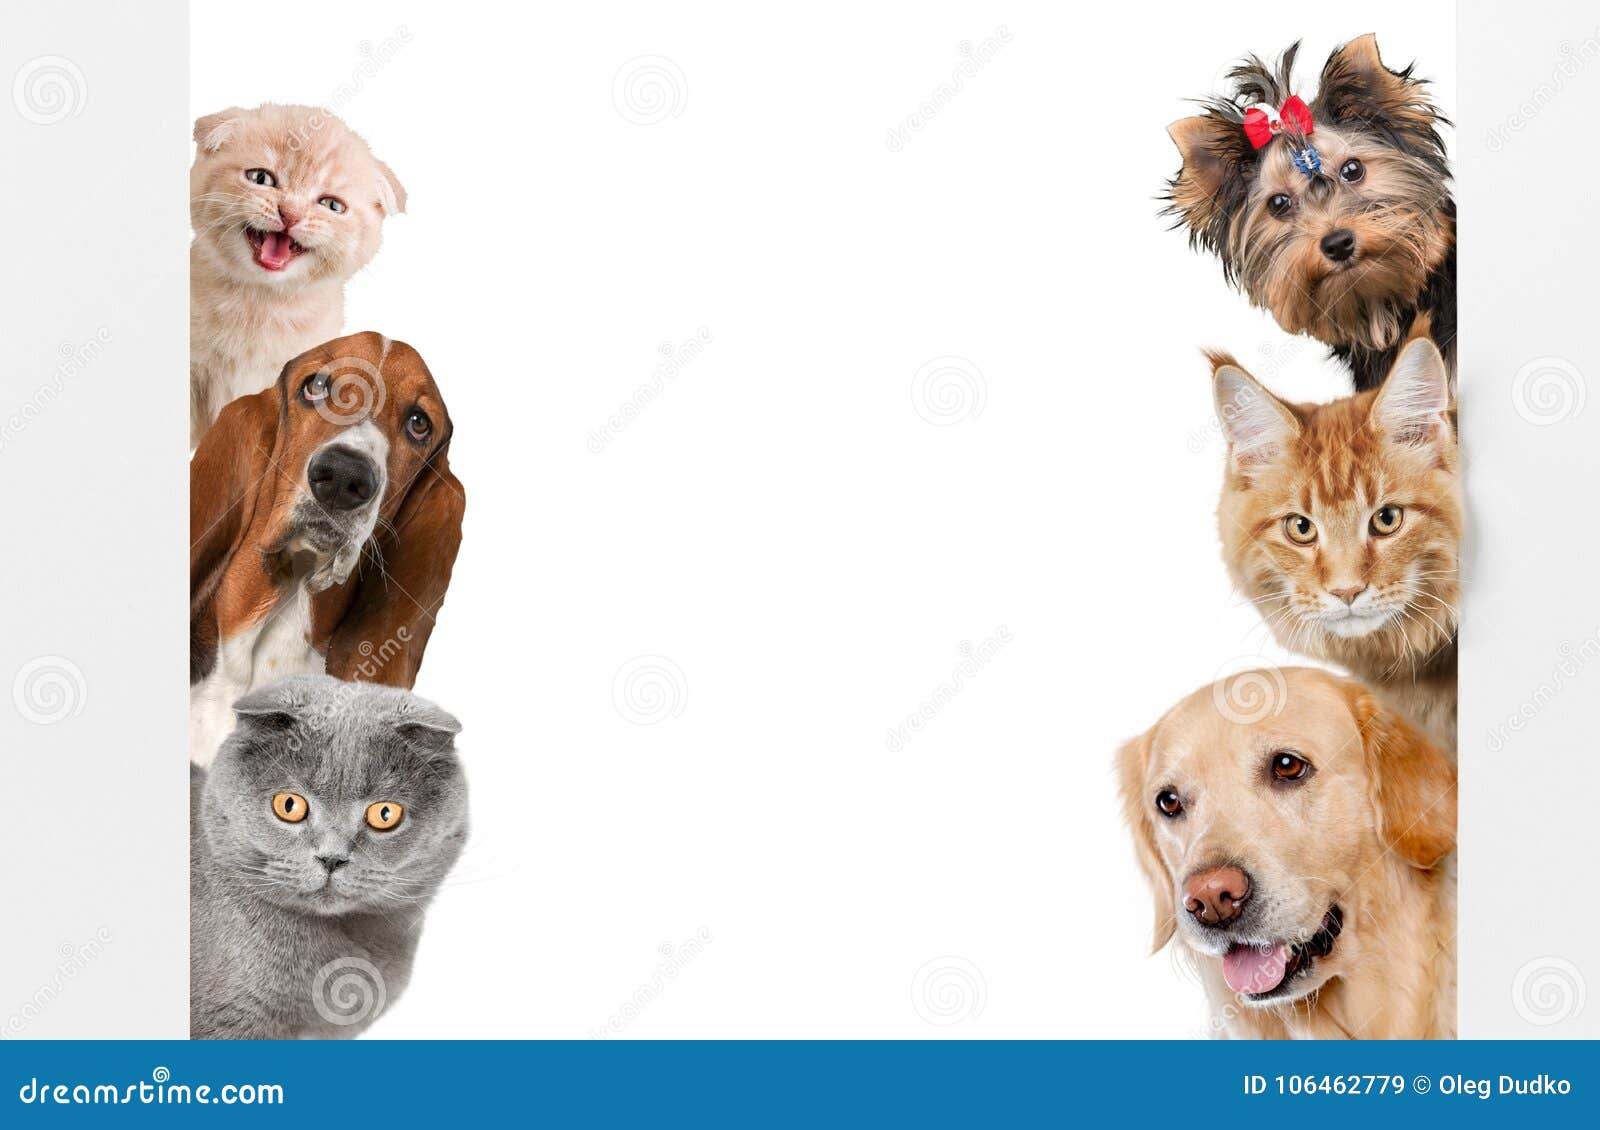 various cats and dogs as frame  on white